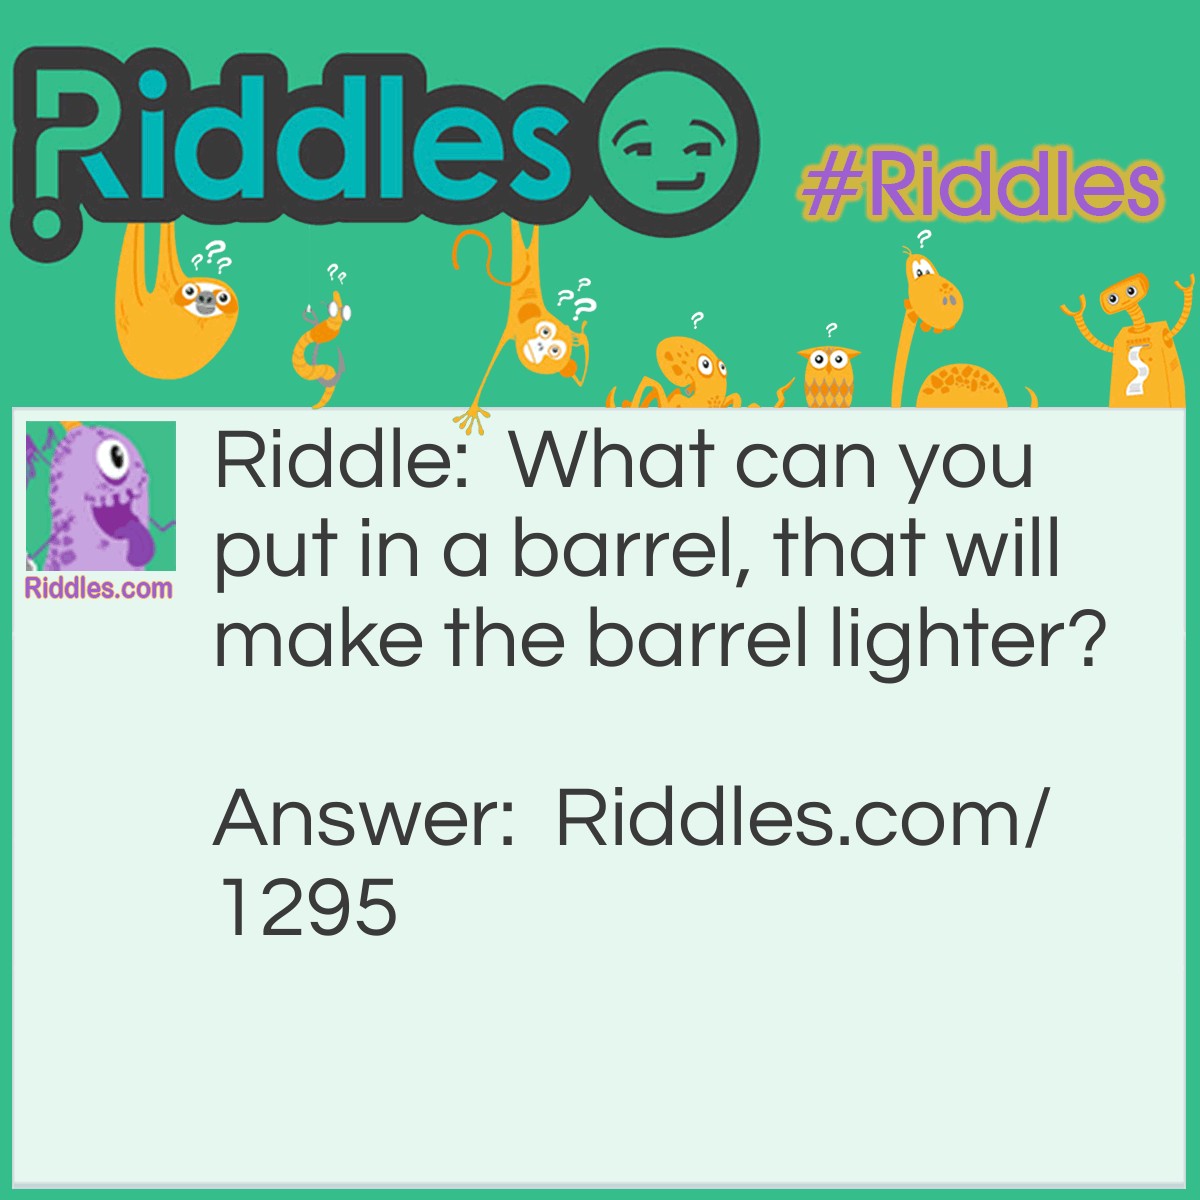 Riddle: What can you put in a barrel, that will make the barrel lighter? Answer: A Hole.